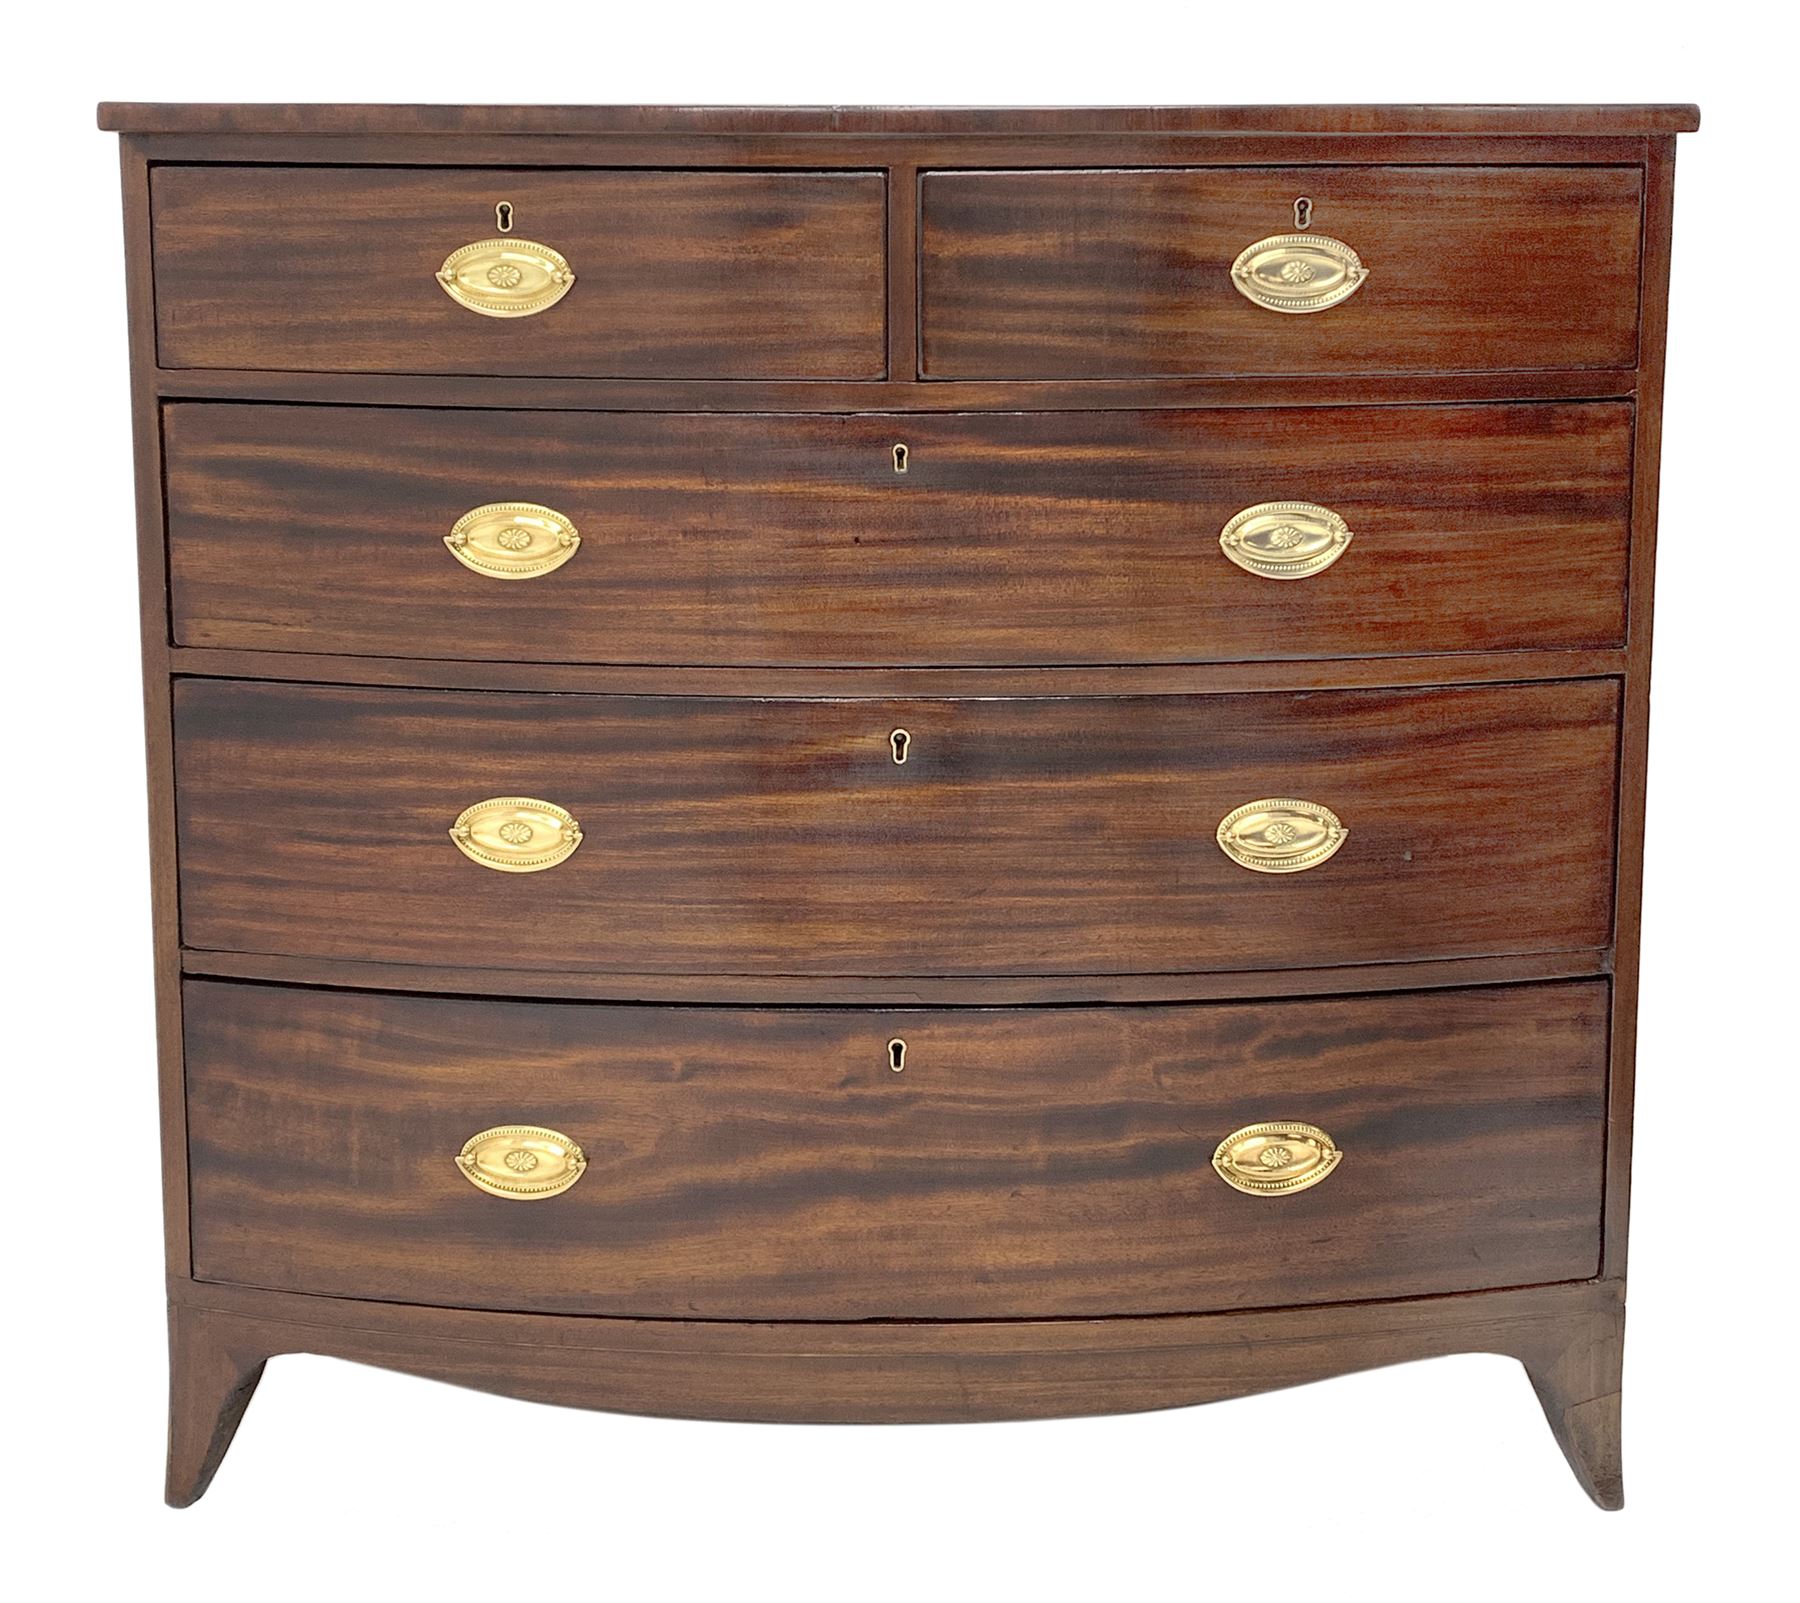 Early 19th century figured mahogany bow front chest, two short and three long drawers, shaped apron